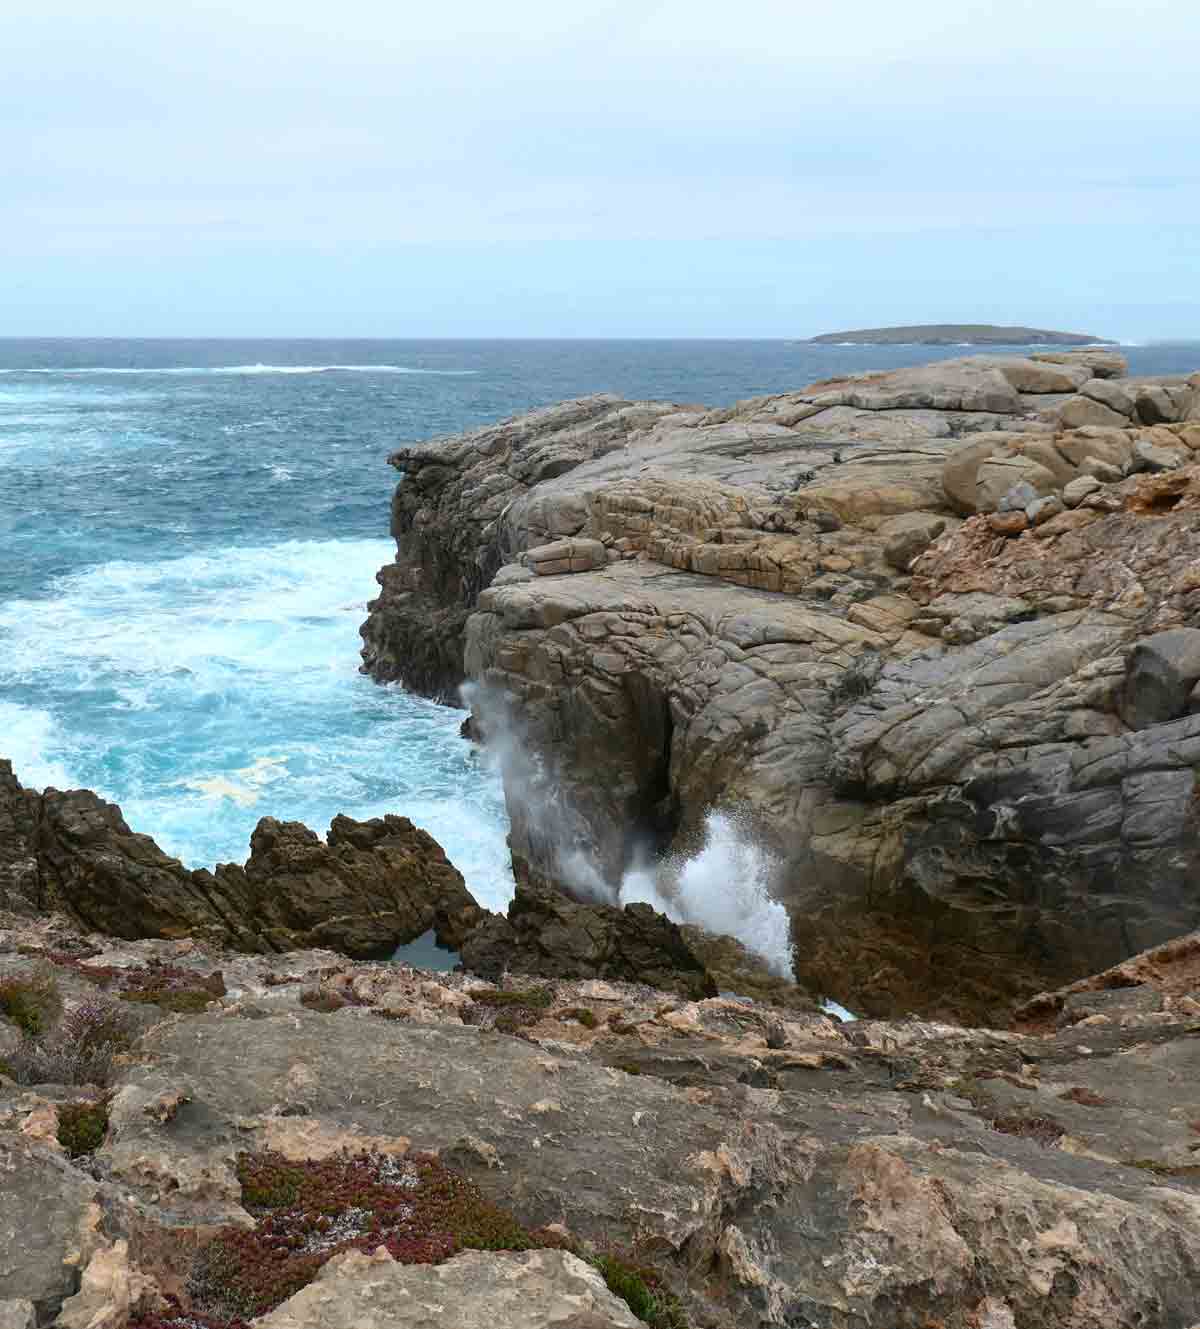 Rockpool & Baleen Blowholes at Cape Carnot. Located in Whaler's Way Sanctuary, Eyre Peninsula, South Australia.